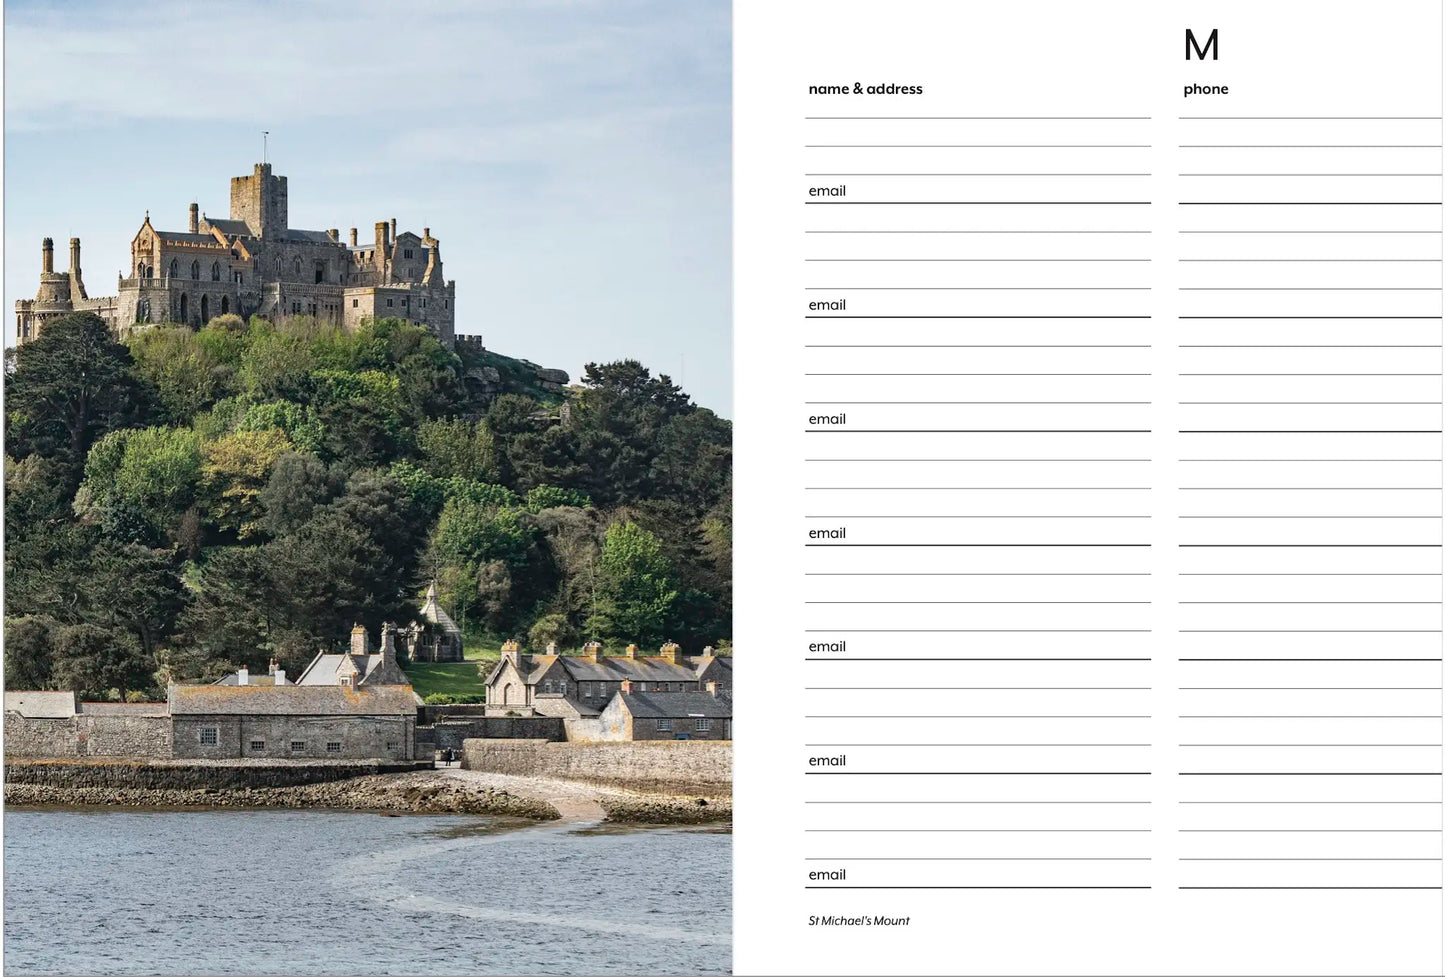  inside pages of address book -  M for St Michael's Mount